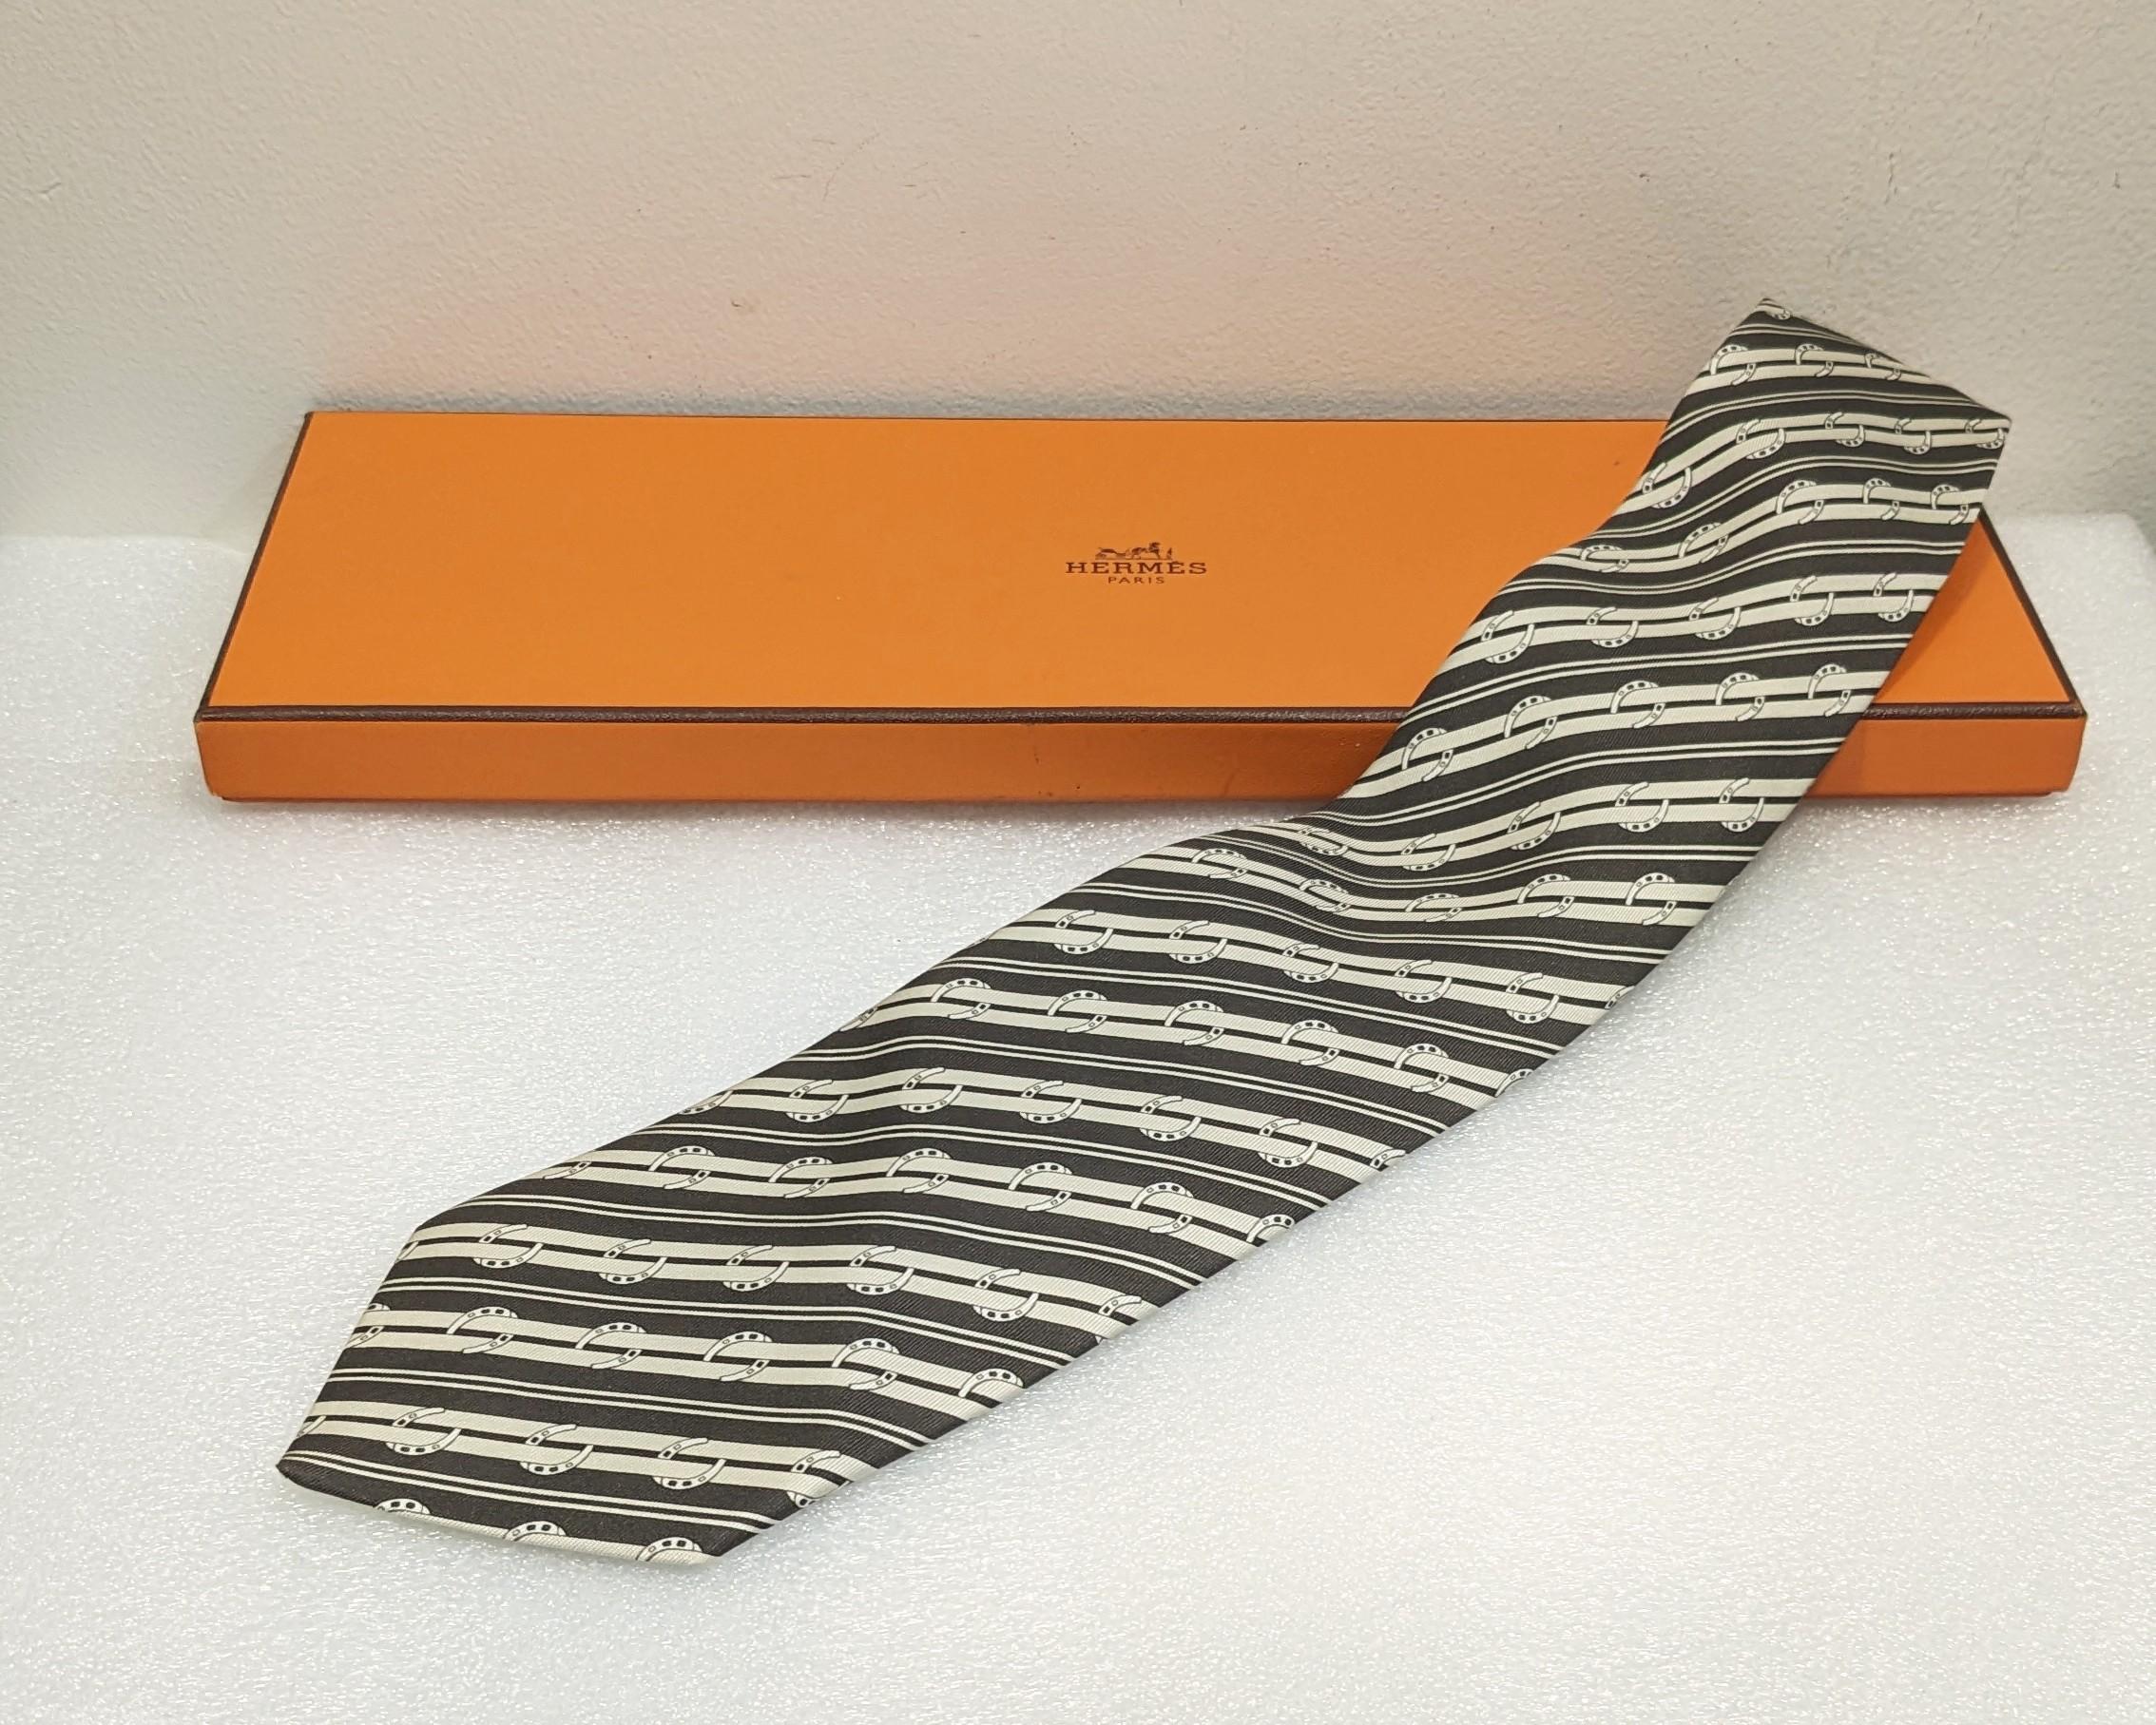 Vintage Hermes Silk Tie
Hermes Horseshoe print tie
Brown, beige, silk ,horseshoe  print, diagonal stripe pattern, finished edge, and pointed toe
Paris, Made In France 

*Orders welcome  all goods are insured and we package all purchases to a high